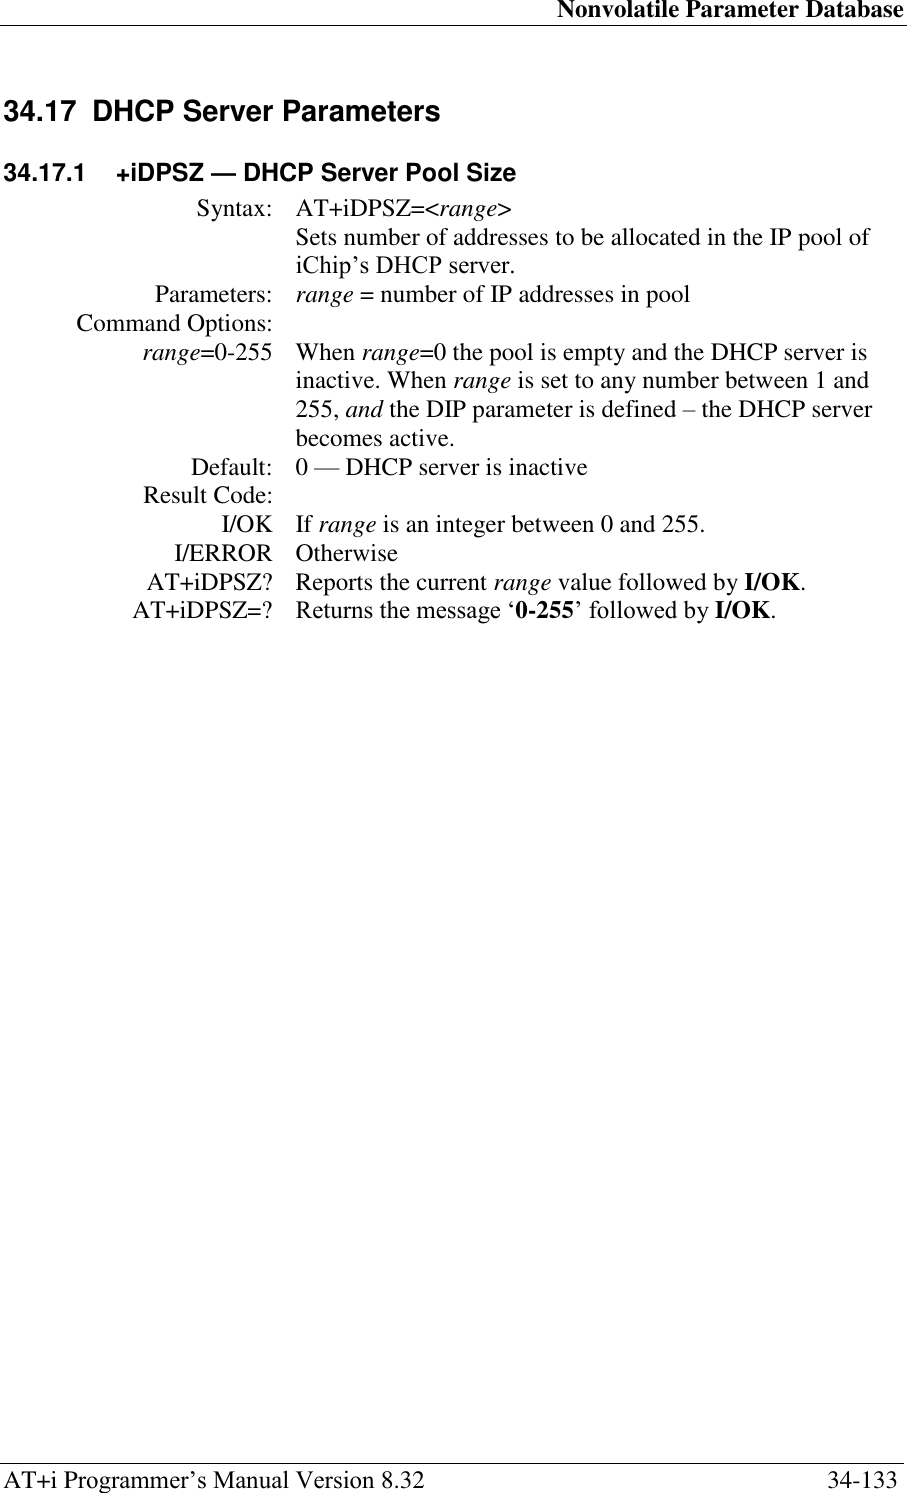 Nonvolatile Parameter Database AT+i Programmer‘s Manual Version 8.32  34-133 34.17  DHCP Server Parameters 34.17.1  +iDPSZ — DHCP Server Pool Size Syntax: AT+iDPSZ=&lt;range&gt;  Sets number of addresses to be allocated in the IP pool of iChip‘s DHCP server. Parameters: range = number of IP addresses in pool Command Options:  range=0-255 When range=0 the pool is empty and the DHCP server is inactive. When range is set to any number between 1 and 255, and the DIP parameter is defined – the DHCP server becomes active. Default: 0 — DHCP server is inactive Result Code:  I/OK If range is an integer between 0 and 255. I/ERROR Otherwise AT+iDPSZ? Reports the current range value followed by I/OK. AT+iDPSZ=? Returns the message ‗0-255‘ followed by I/OK.  